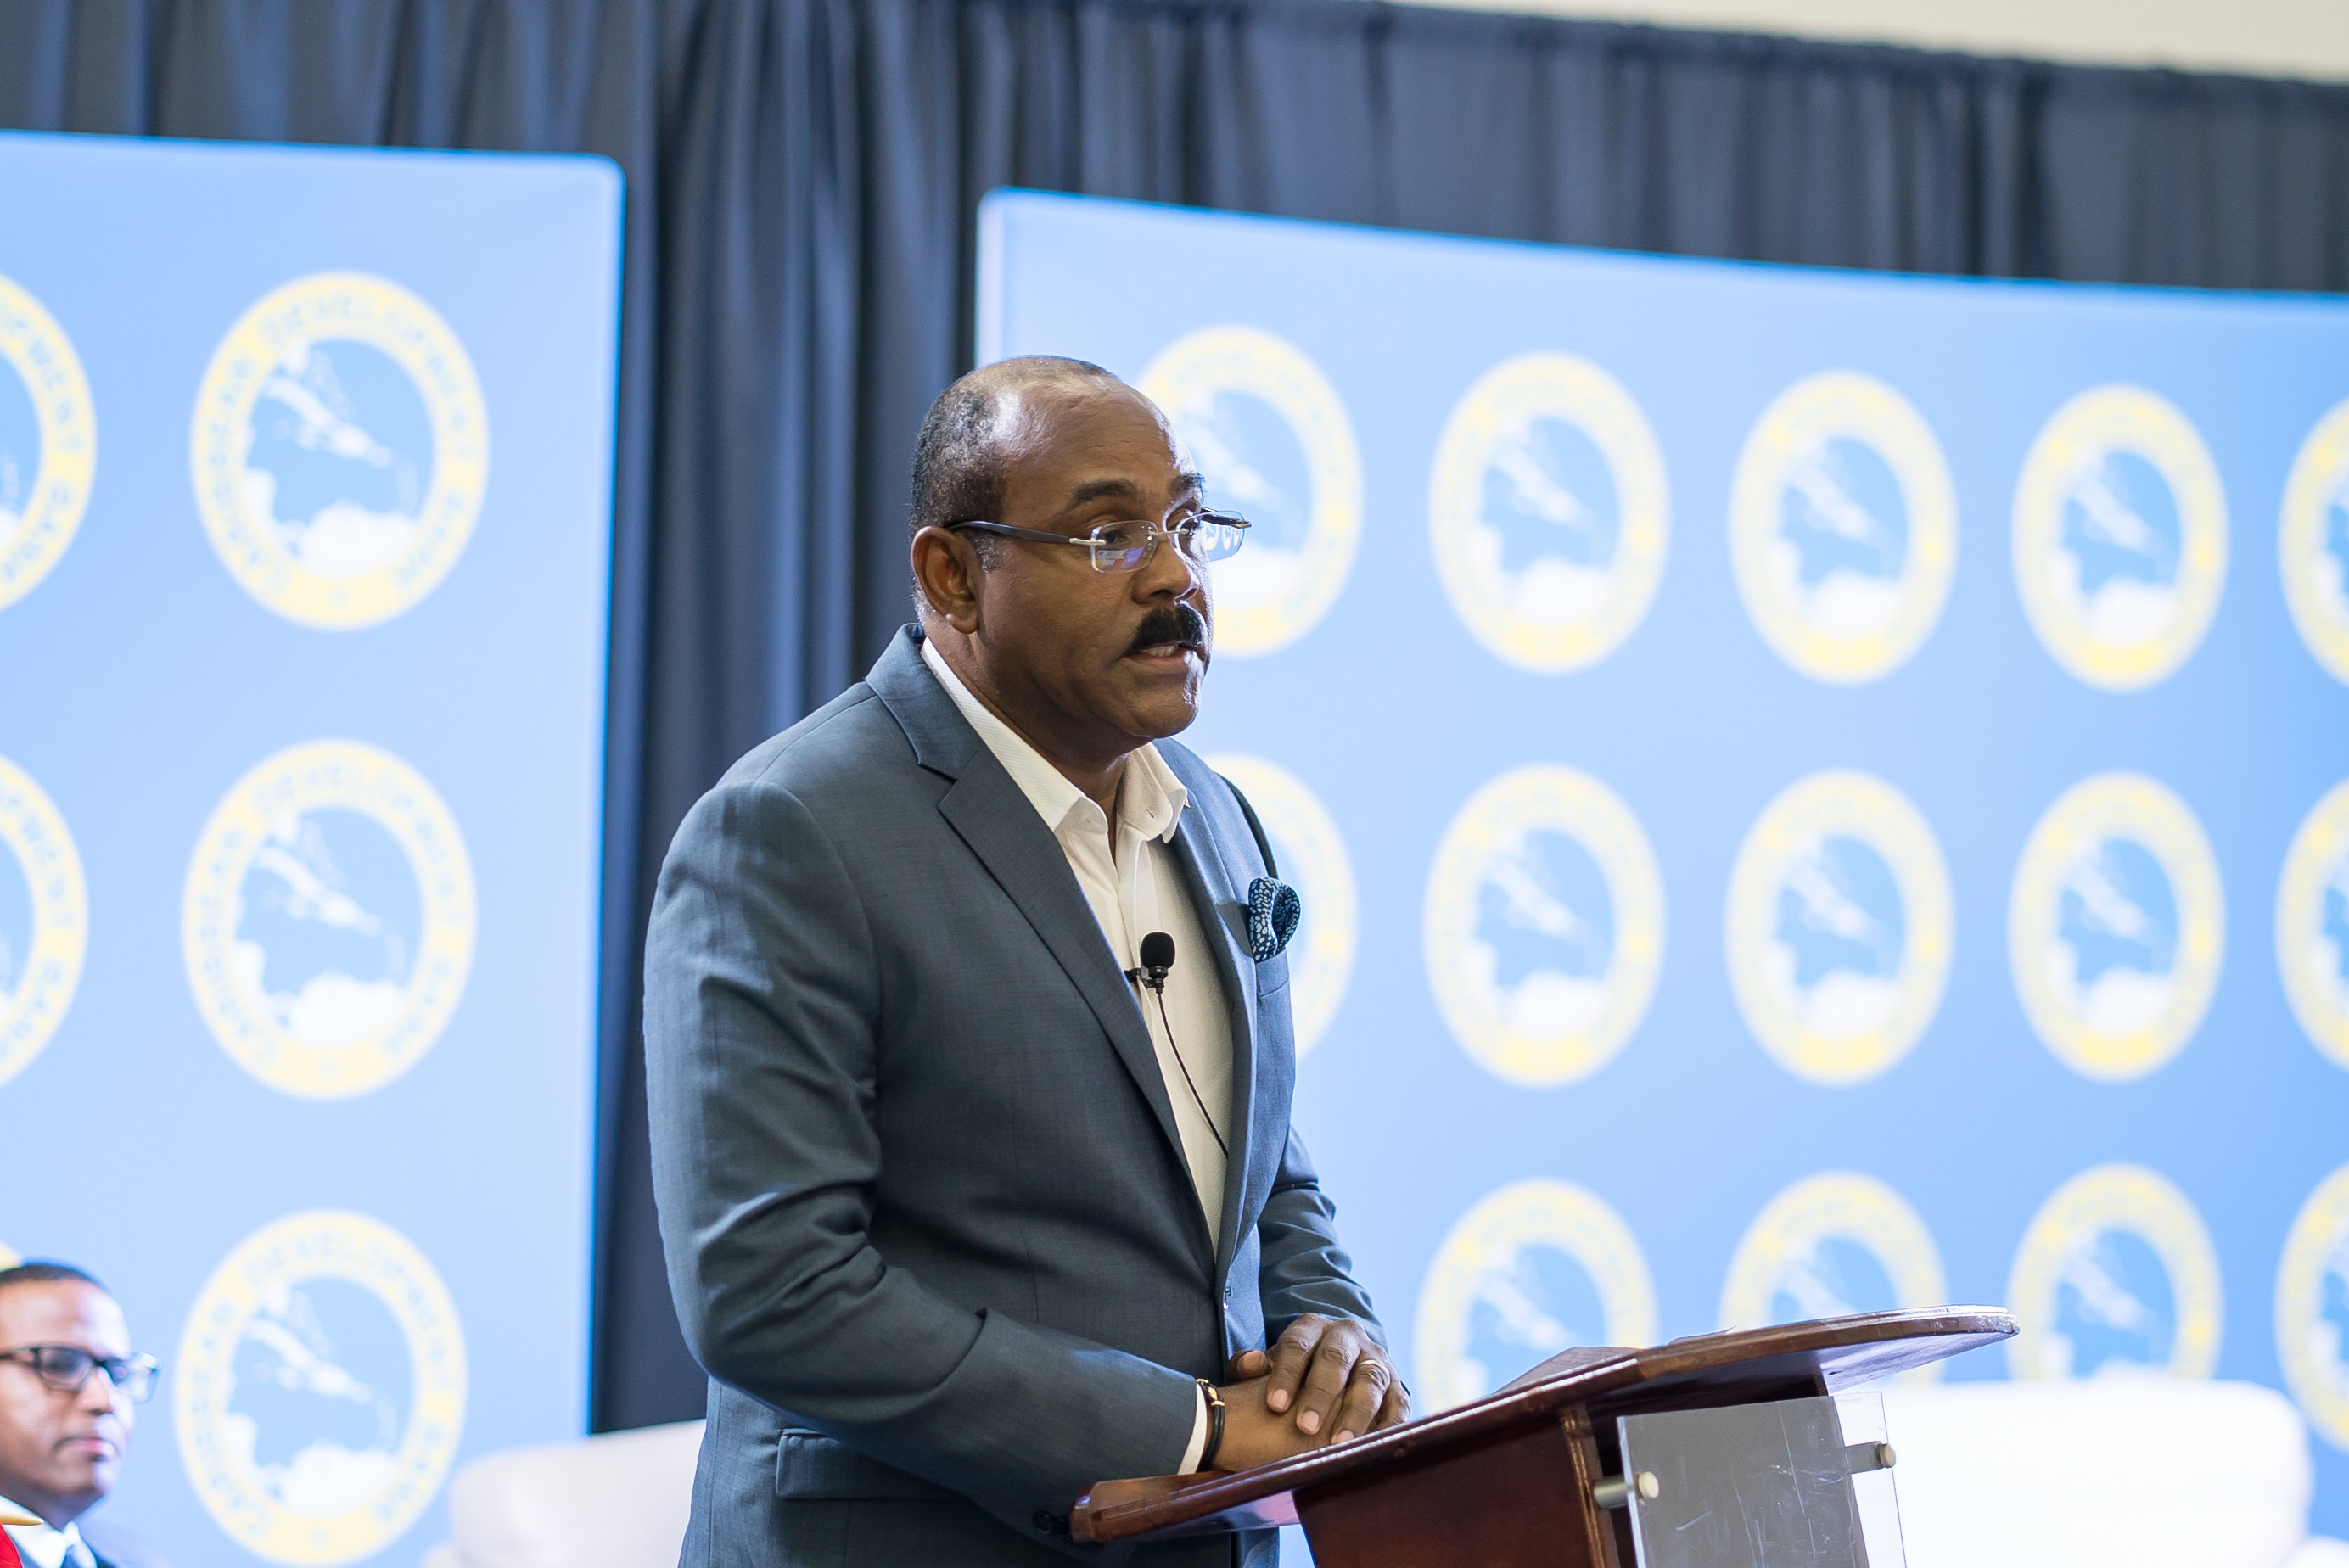 Prime Minister the Hon. Gaston Browne delivers his keynote presentation during the seminar on Air Transport Connectivity and Competitiveness, hosted by the Caribbean Development Bank (CDB) in Grenada on May 30.